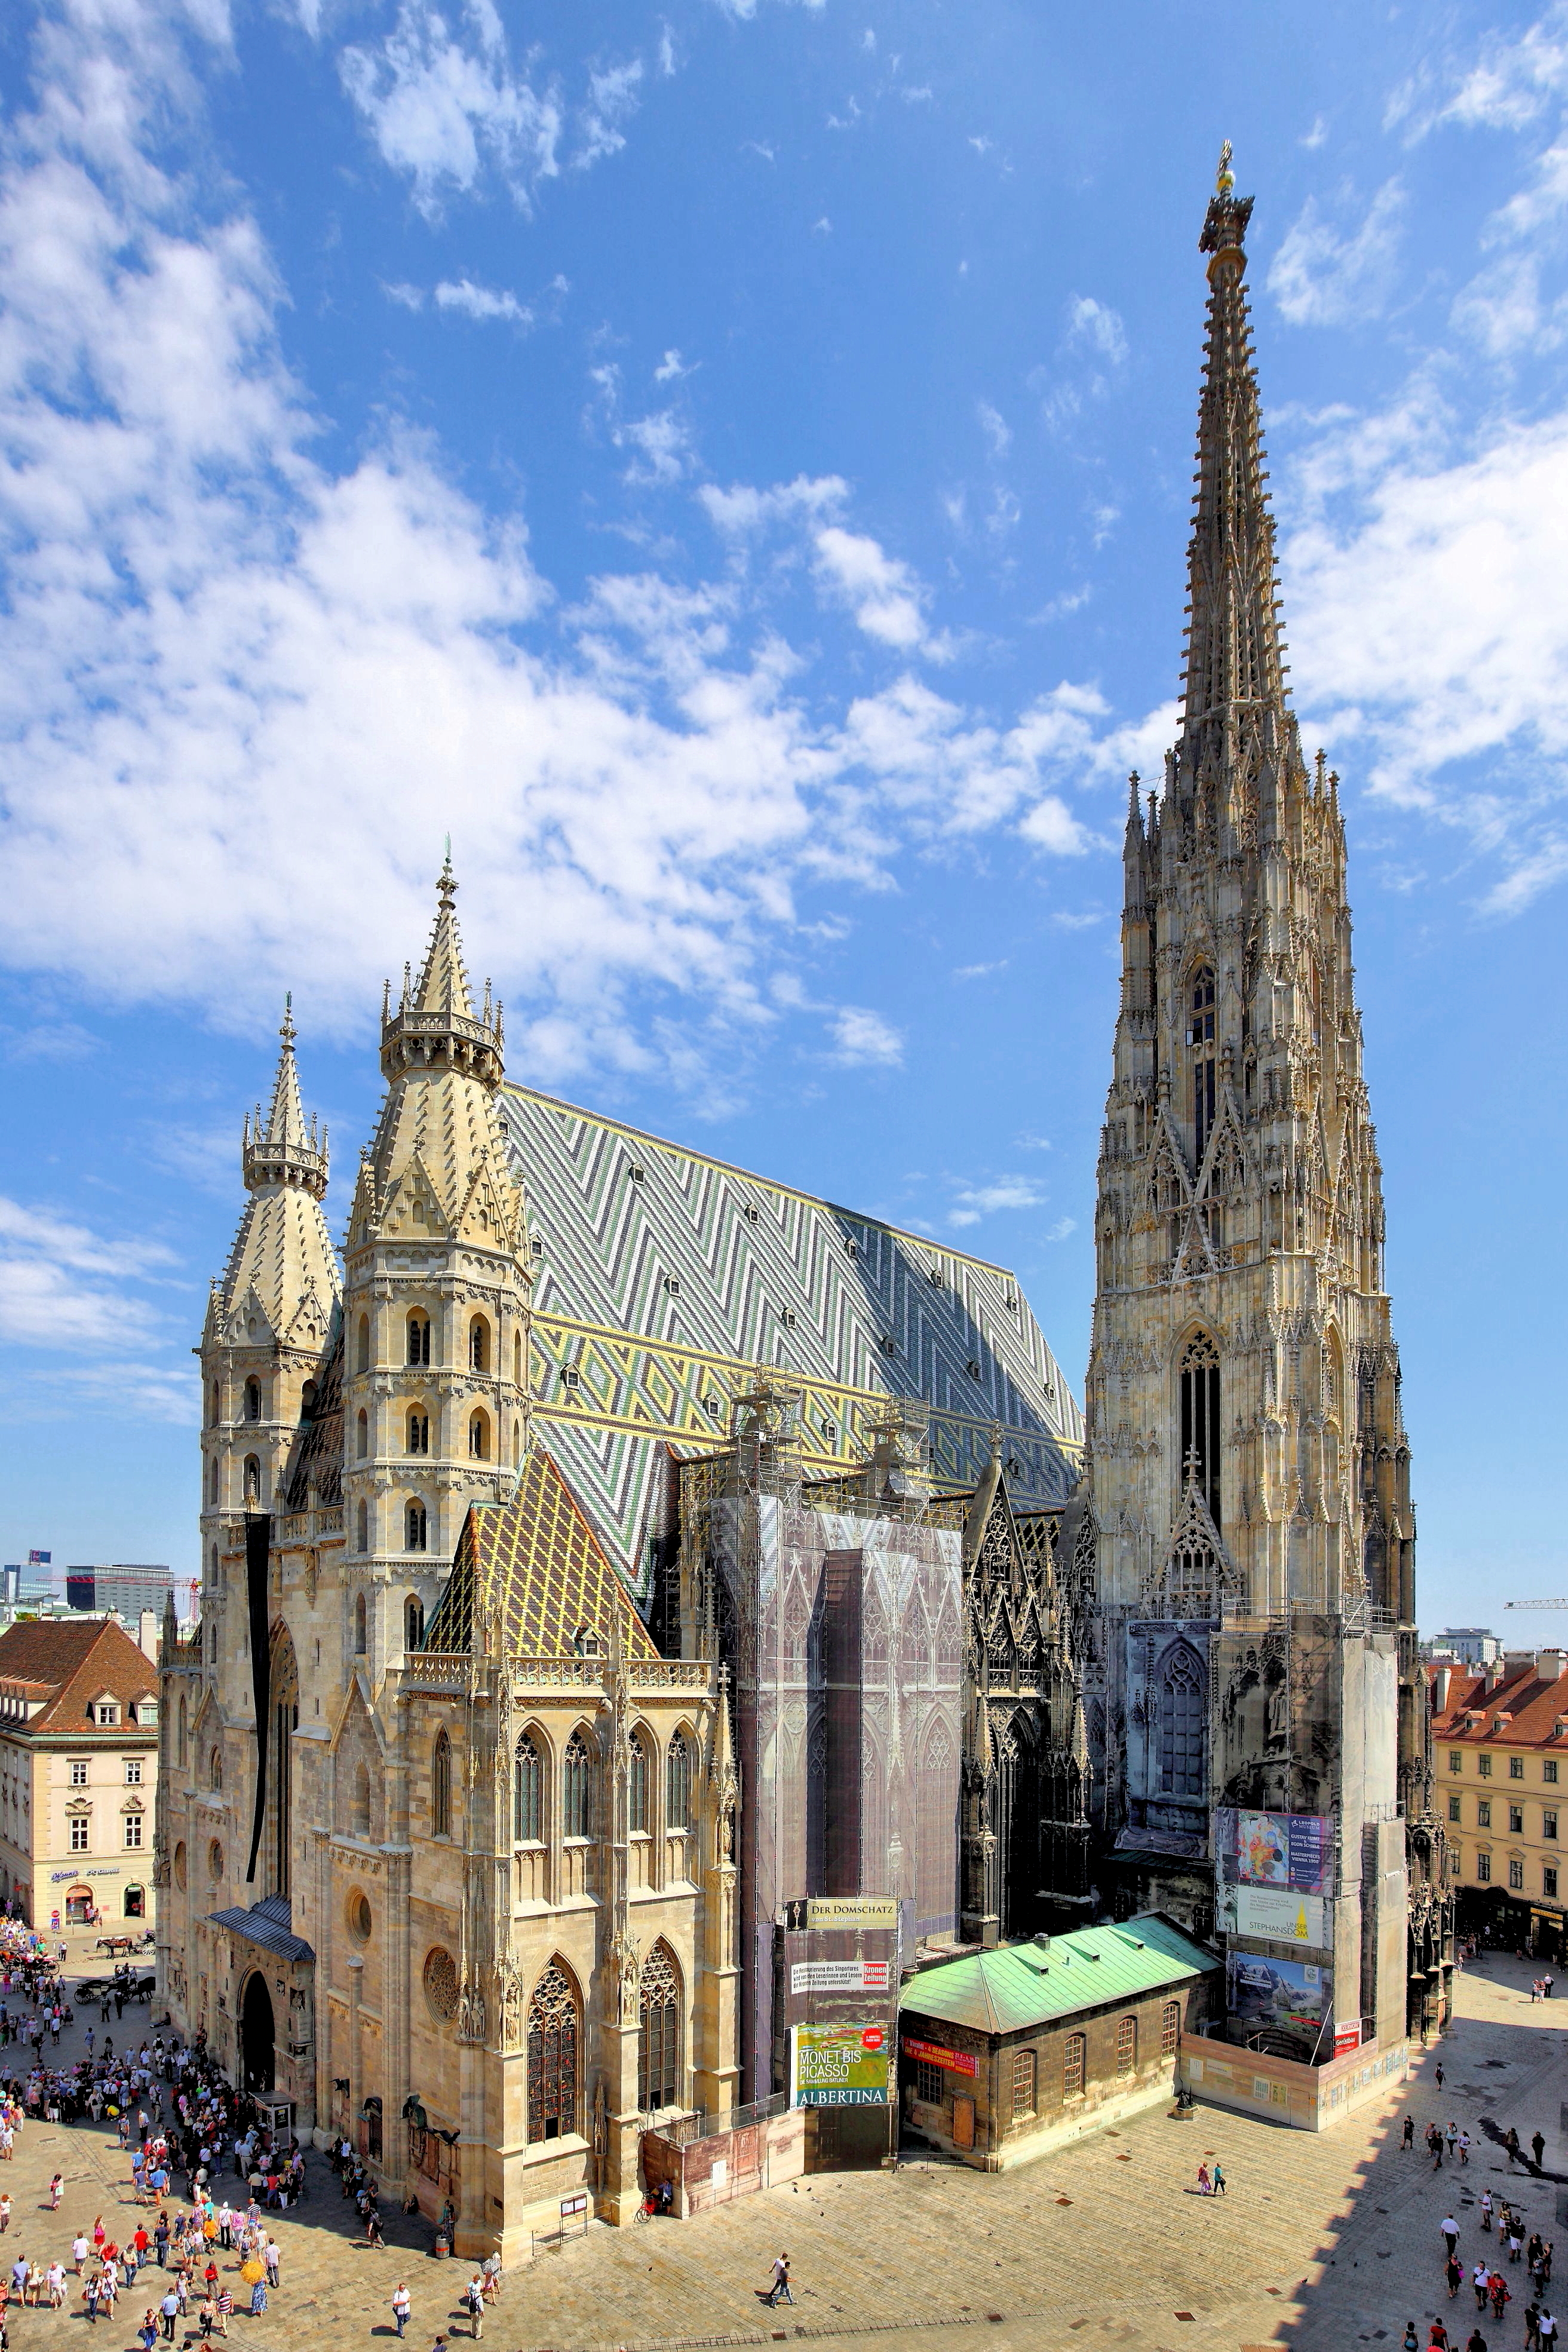 St. Stephen's Cathedral, Vienna - Wikipedia